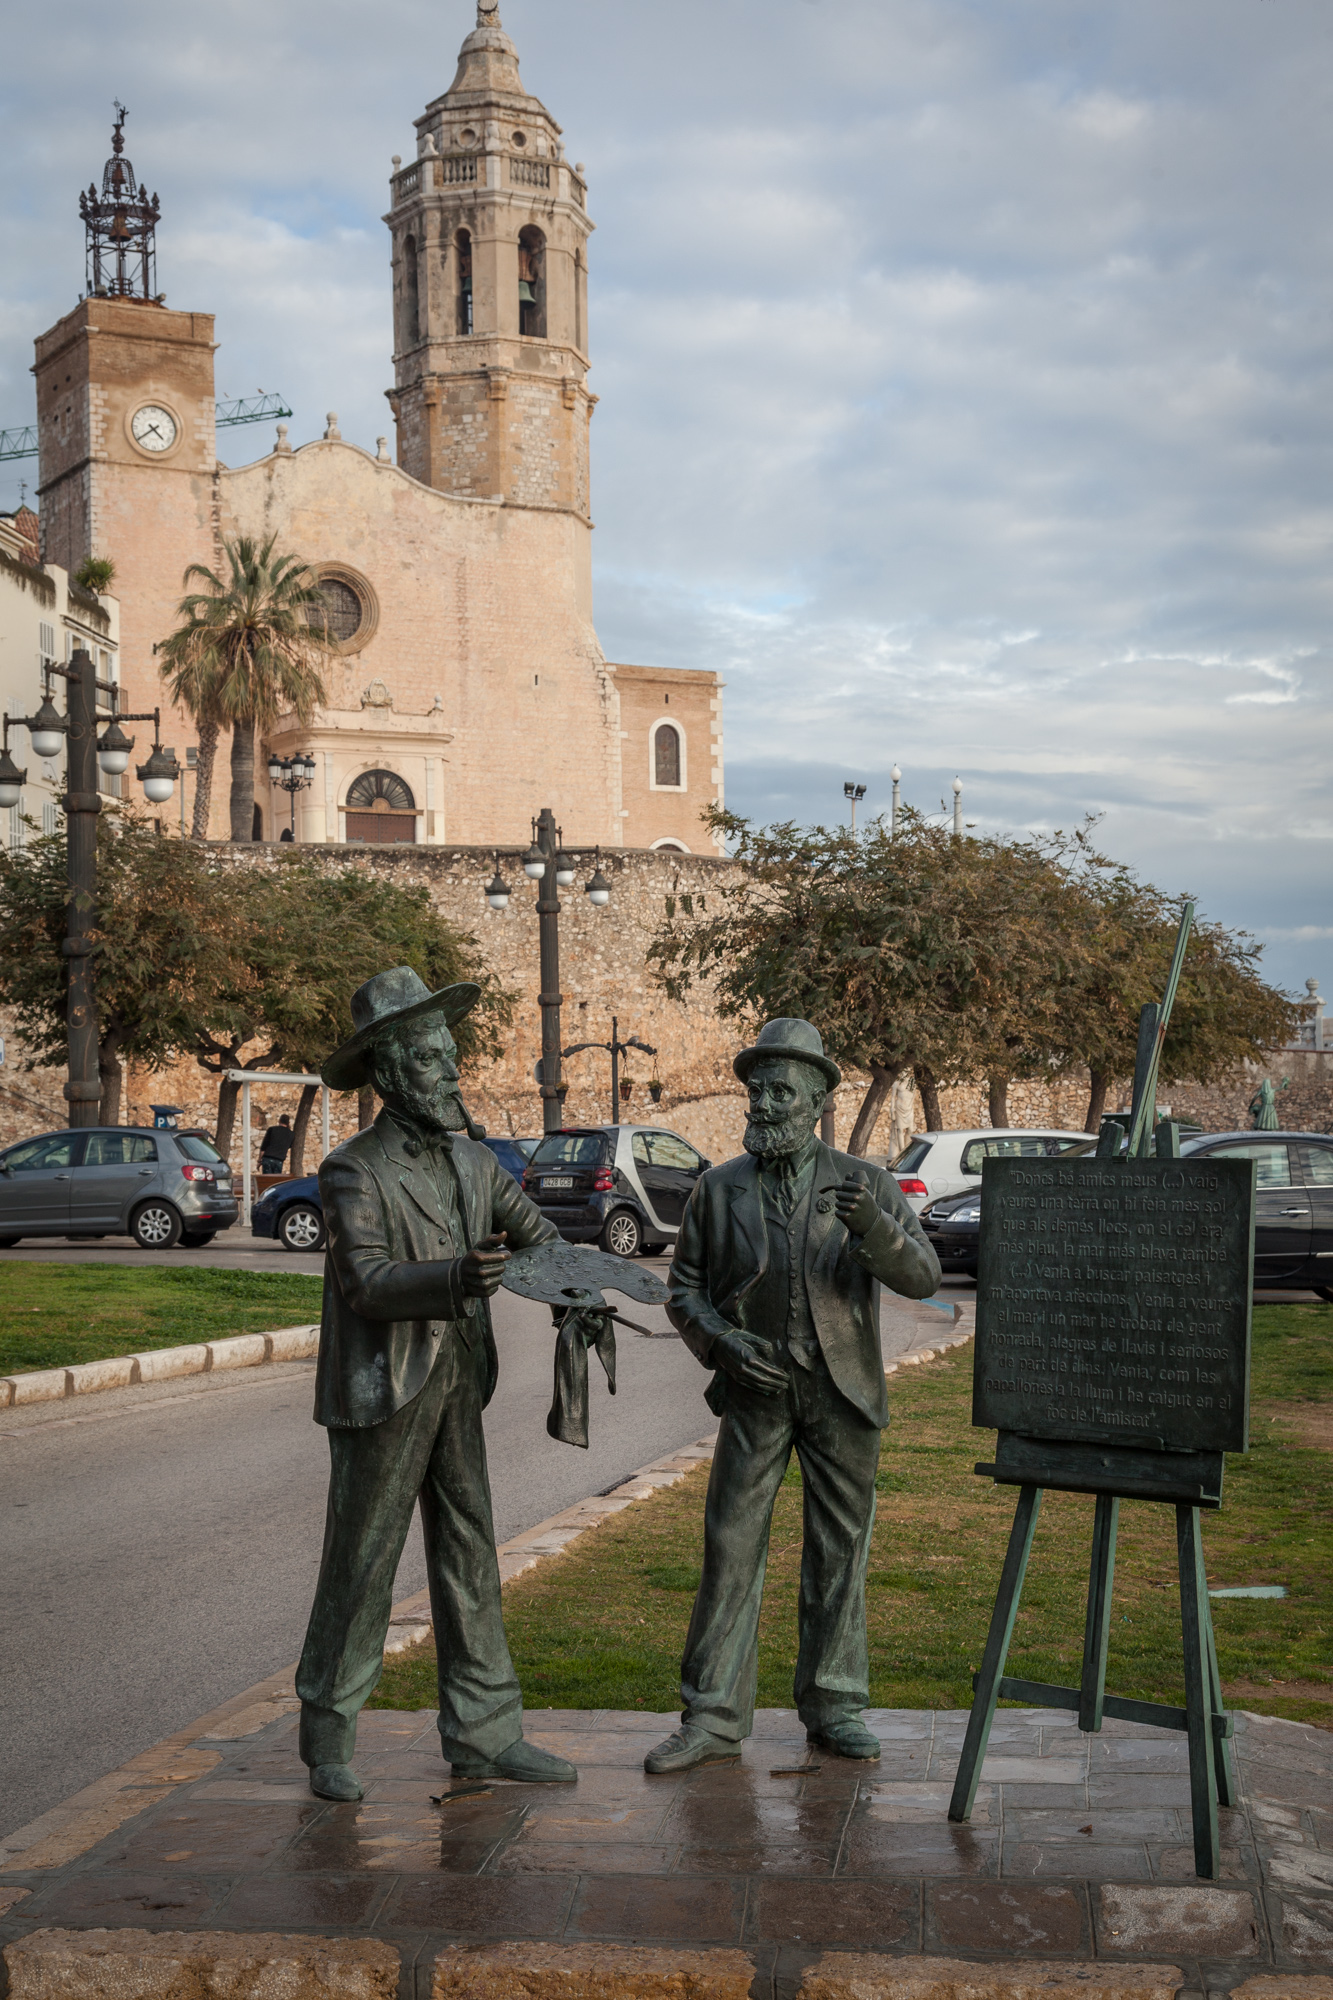 More public artwork in Sitges... this is of Santiago RusiÃol and Ramon Casas.